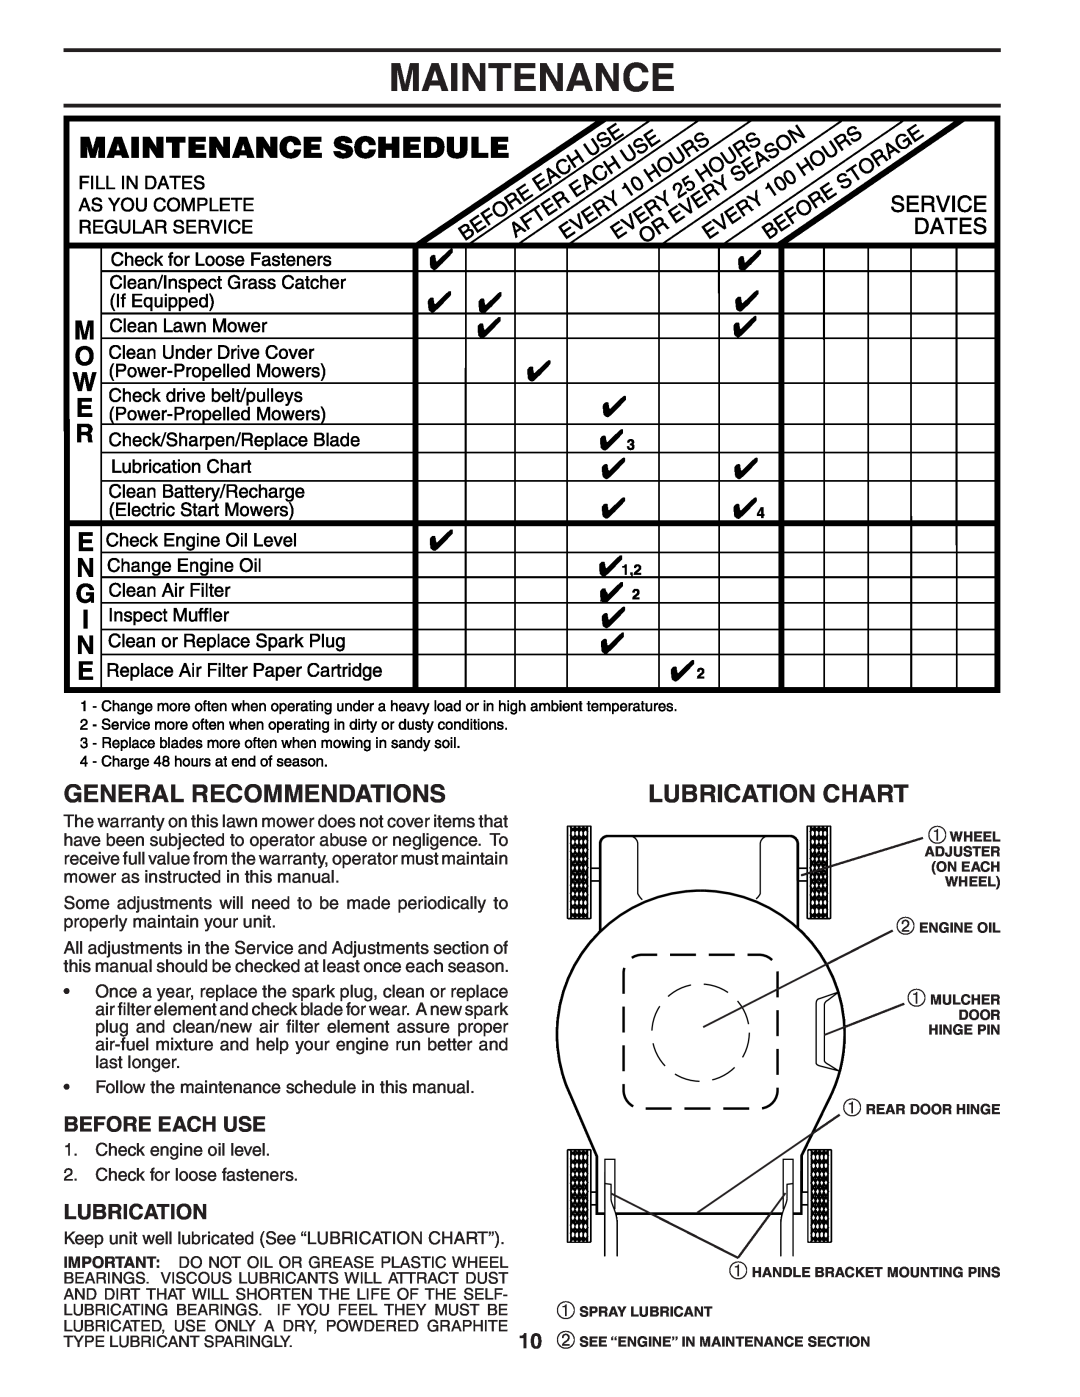 Husqvarna 5521CH owner manual Maintenance, General Recommendations, Lubrication Chart, Before Each Use 